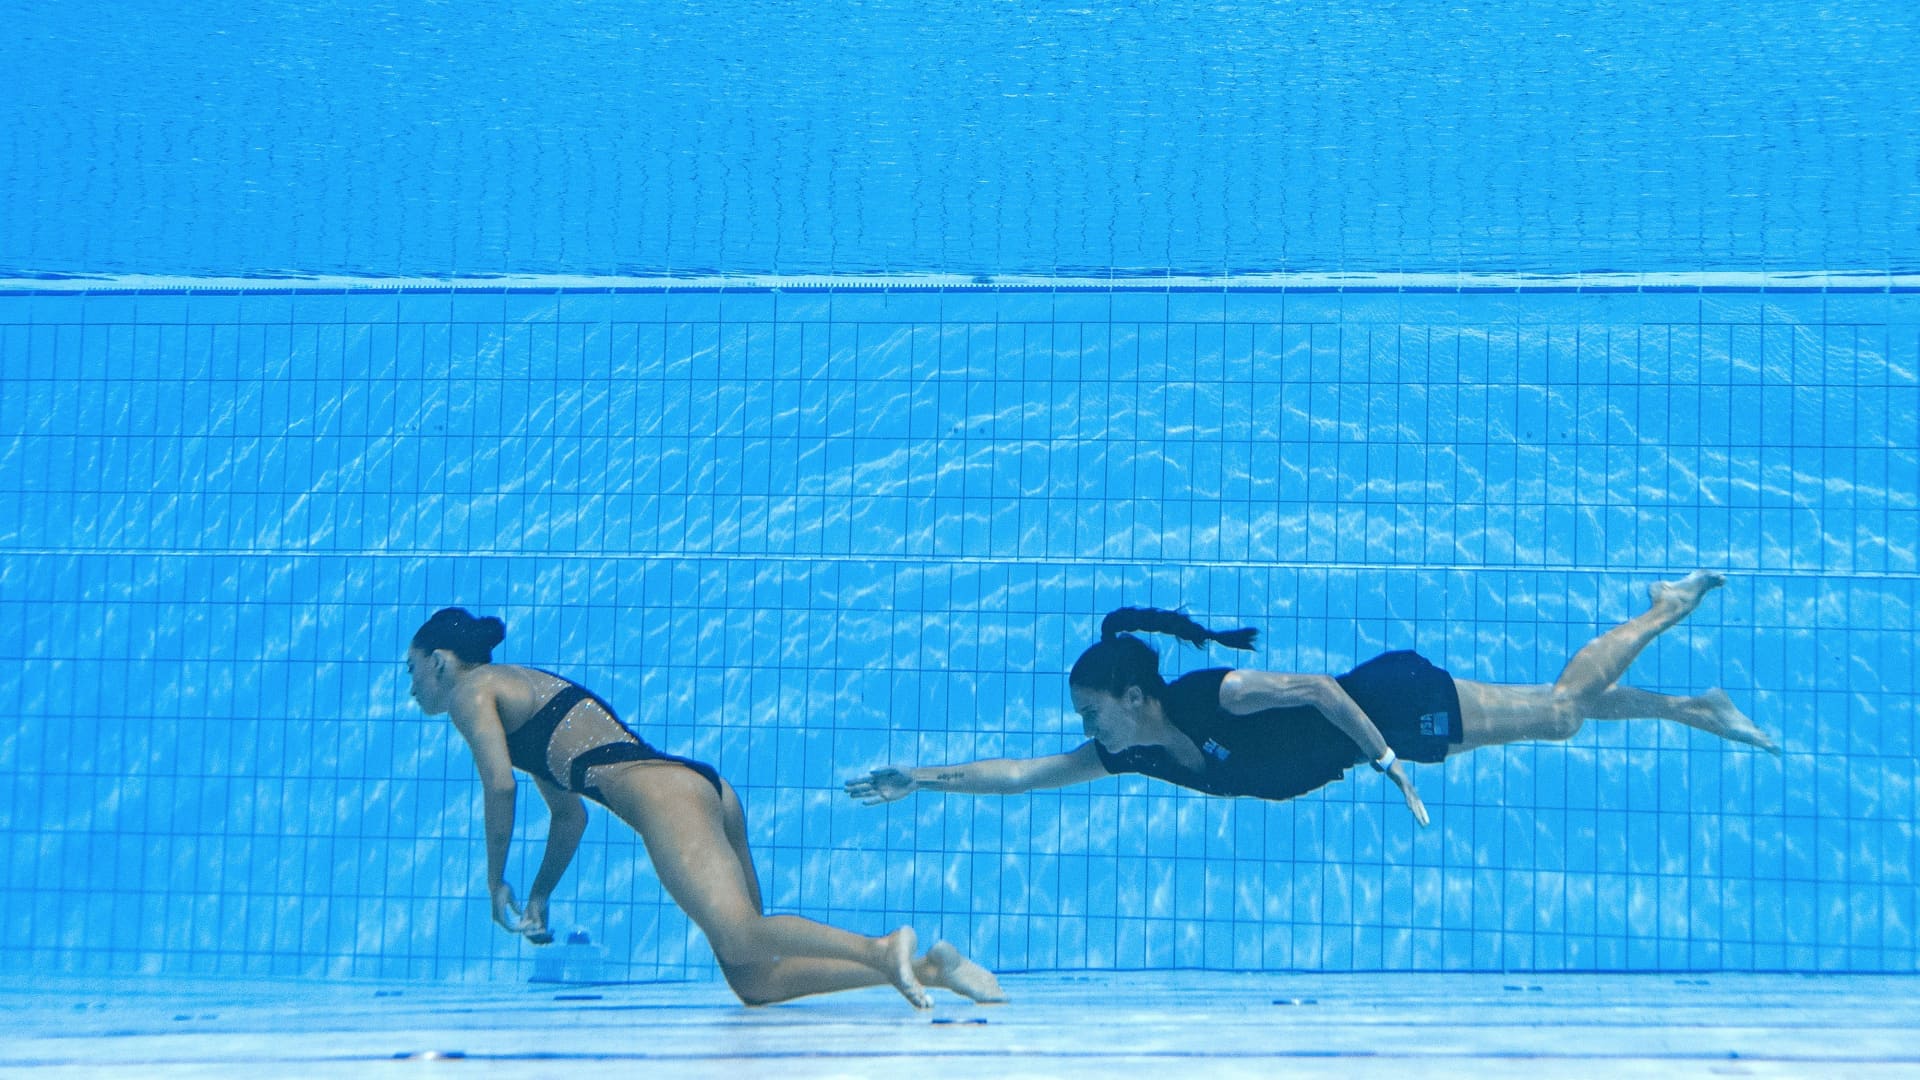 Anita Alvarez loses consciousness in pool at world championships in Budapest - CNBC (Picture 1)